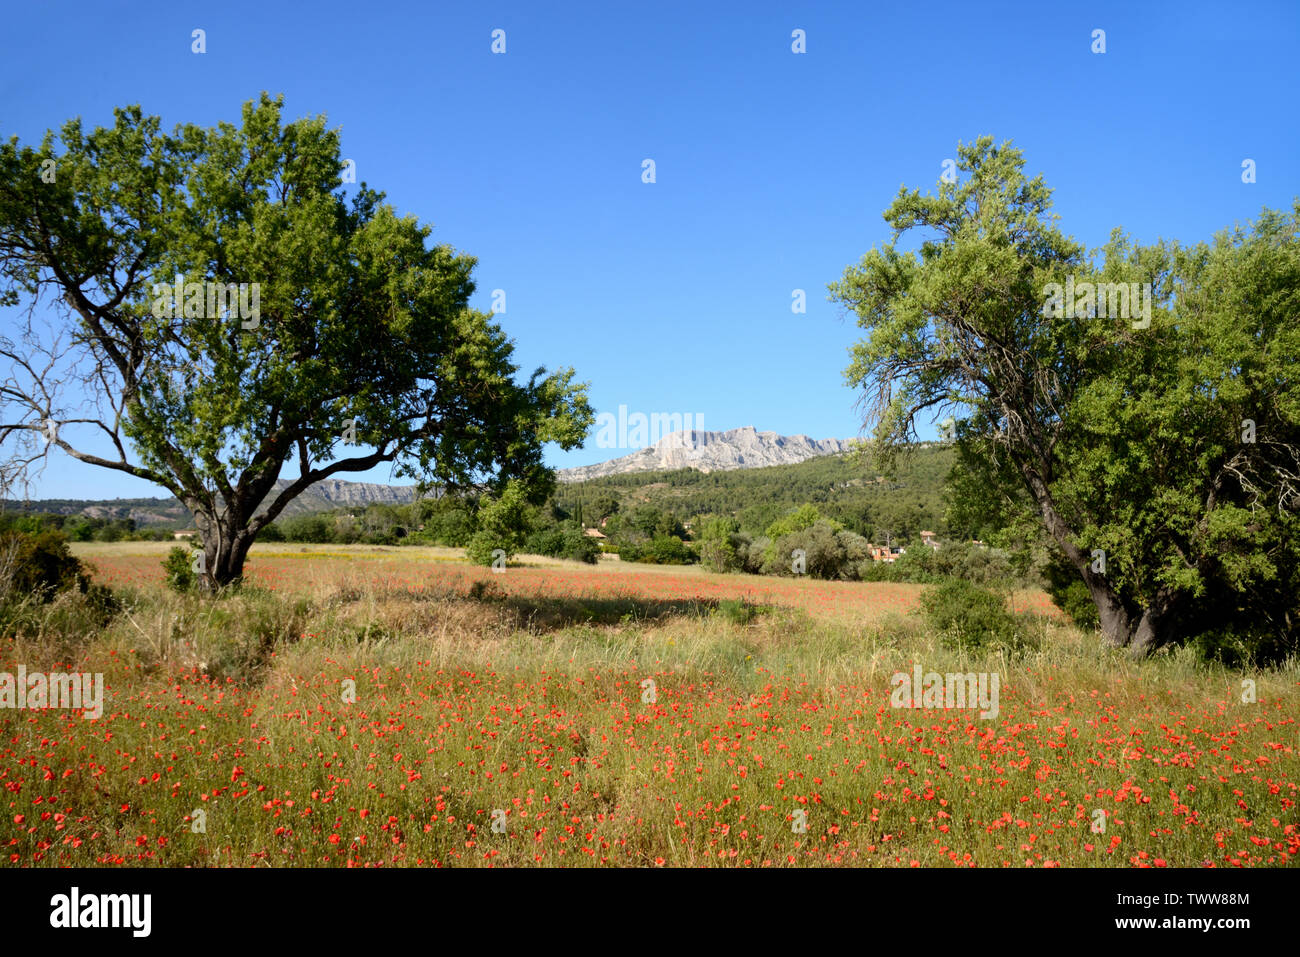 Mont Sainte-Victoire Mountain and Poppy Field at Beaurecueil near Aix-en-Provence Provence France Stock Photo